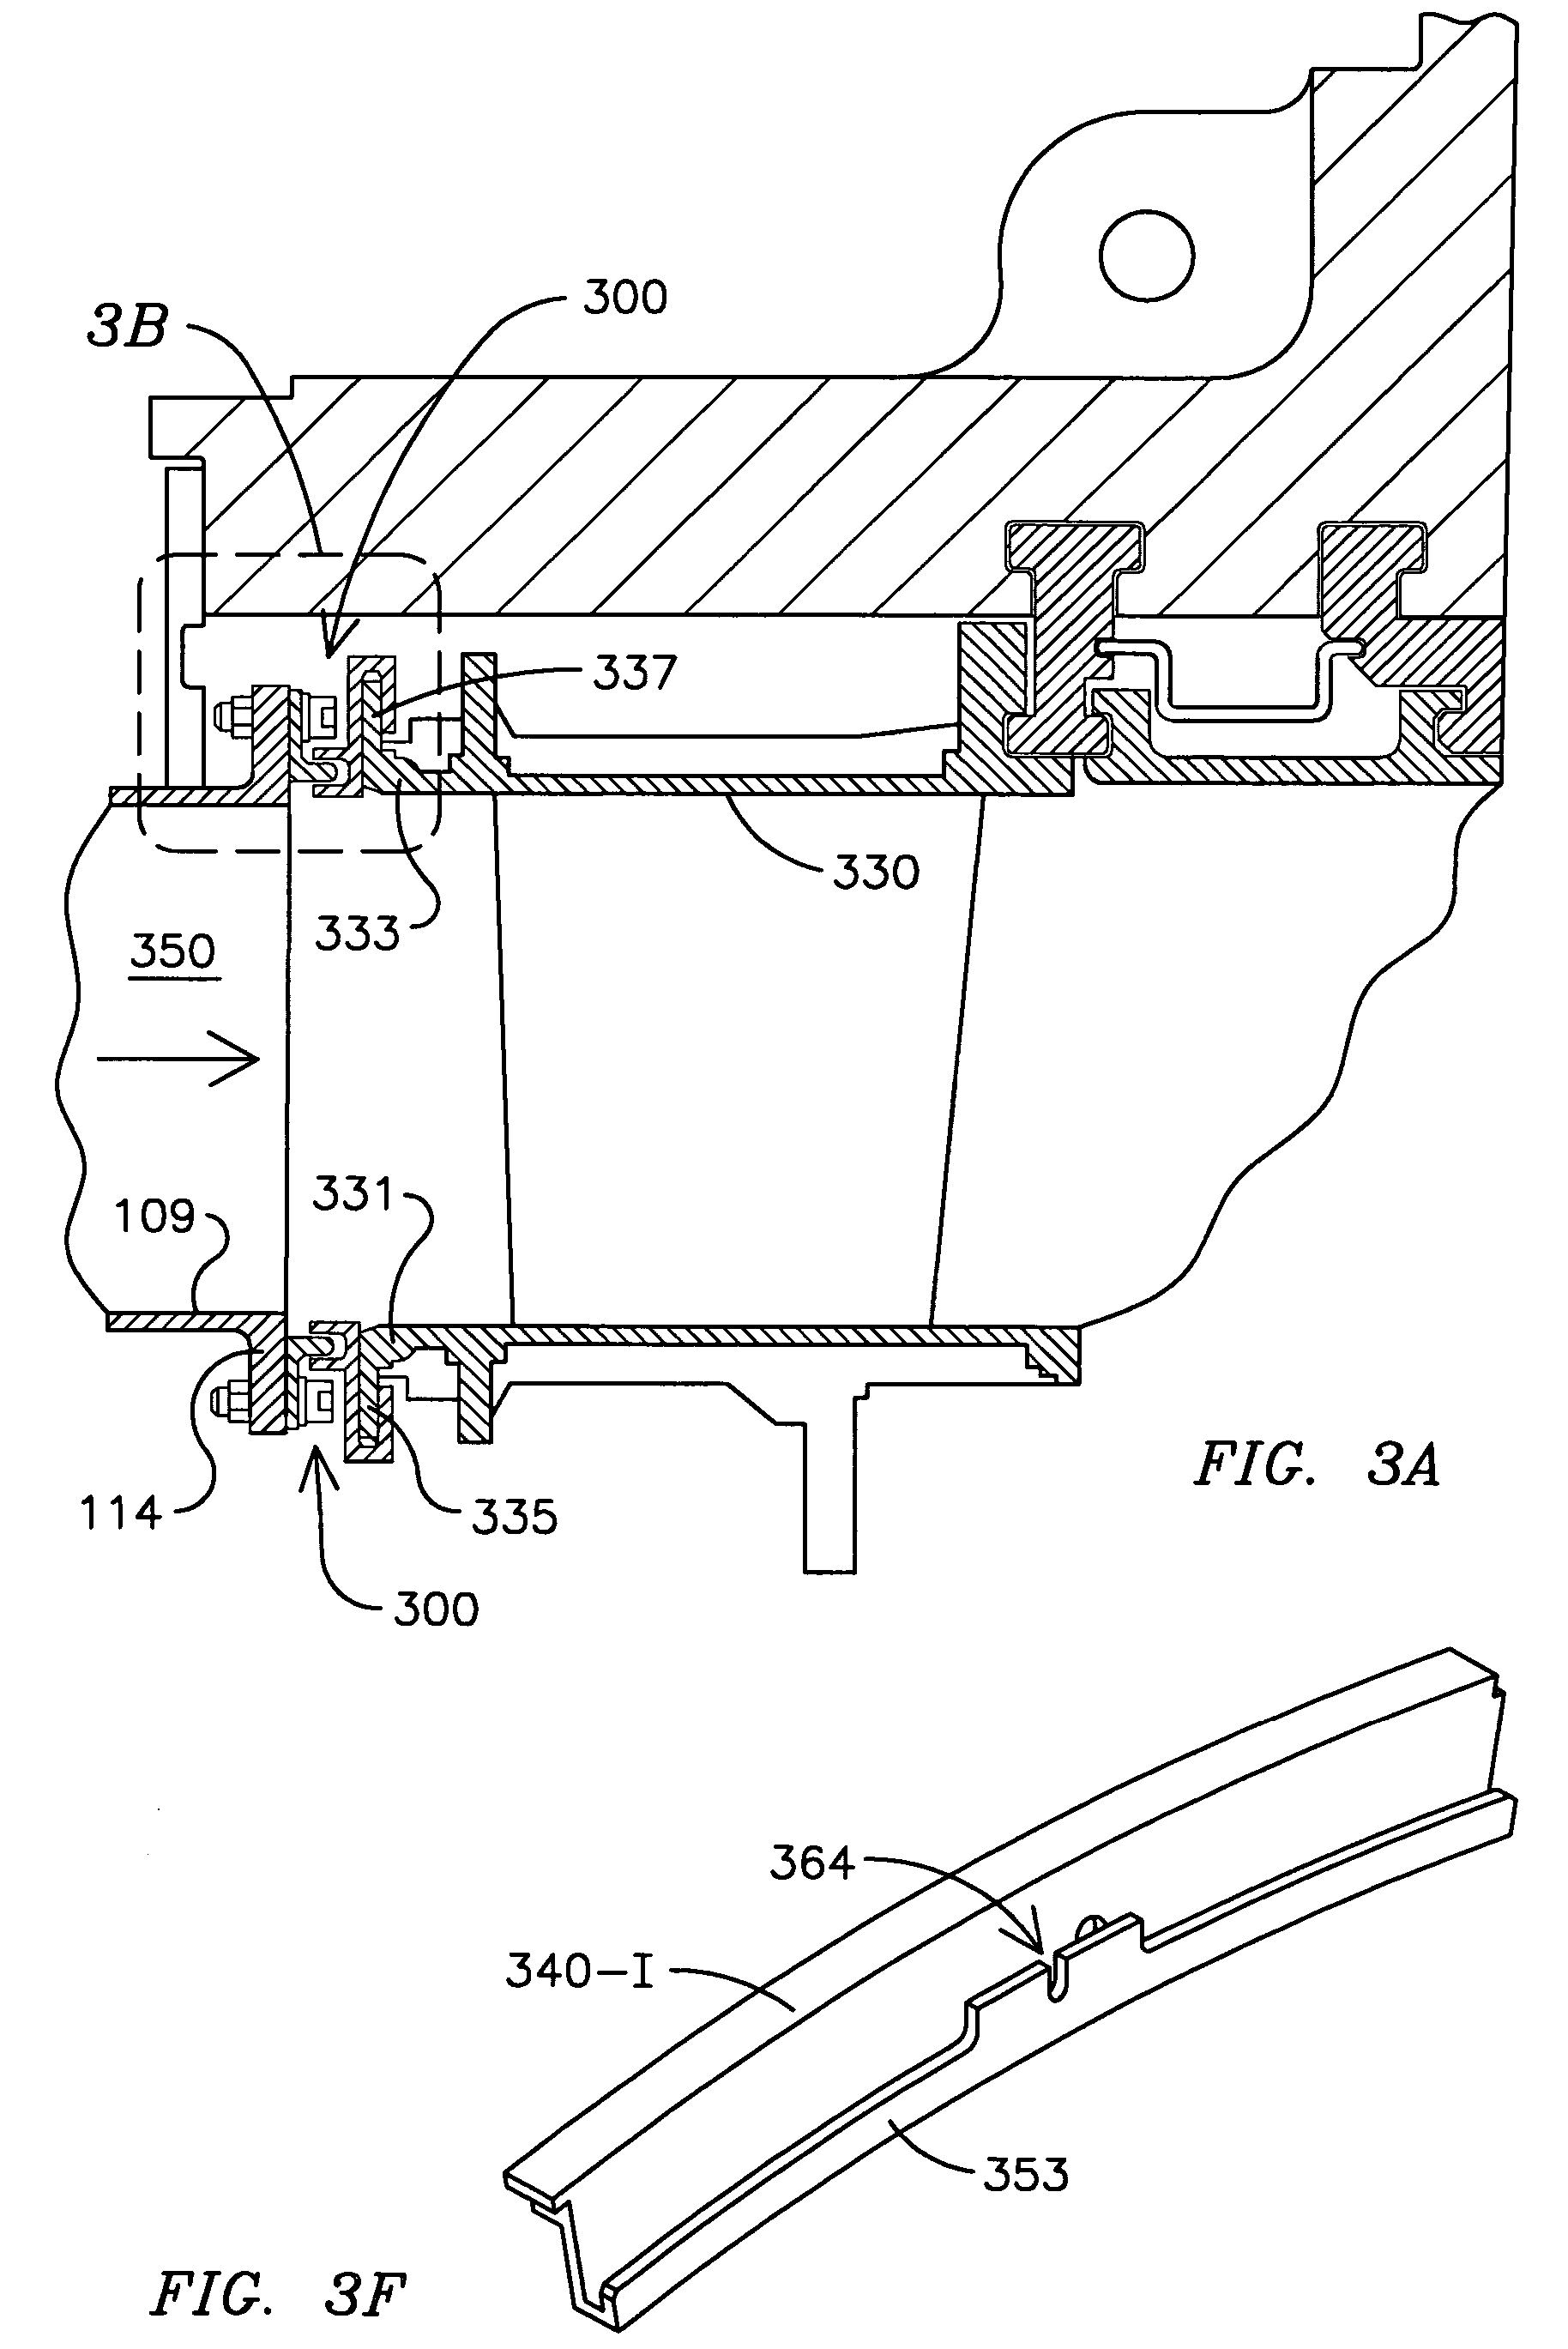 Transition-to-turbine seal apparatus and kit for transition/turbine junction of a gas turbine engine